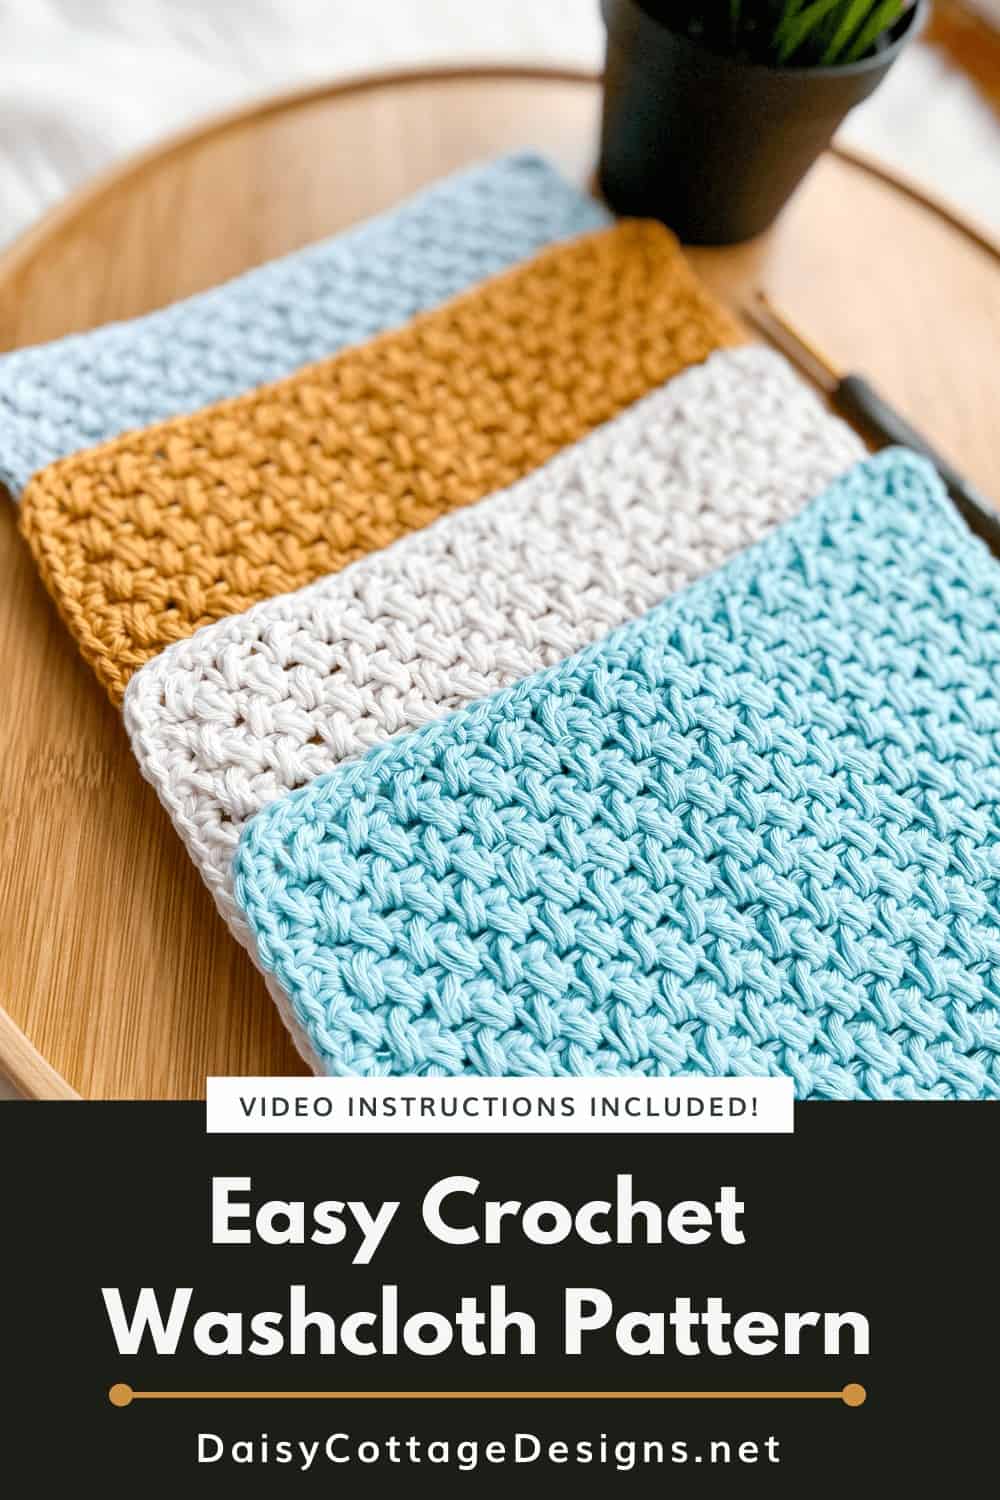 Learn how to make a washcloth using this free crochet washcloth pattern. The written and video tutorial will help you make this washcloth.